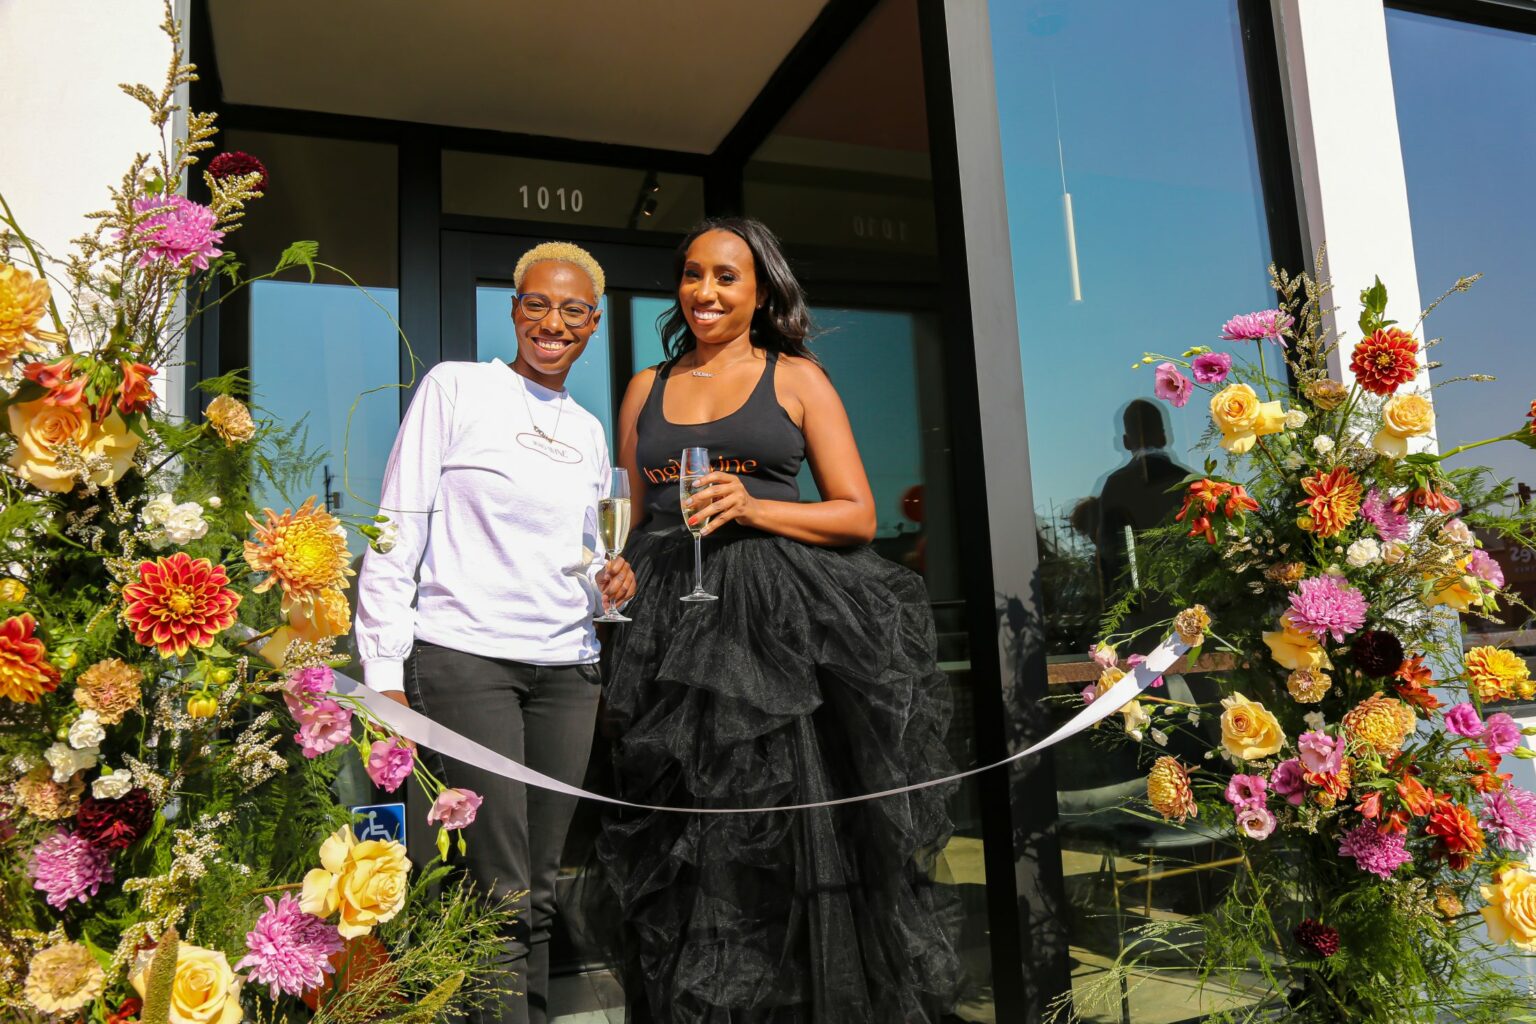 Sisters Leslie and Leann Jones, owners of 1010 Wine & Events